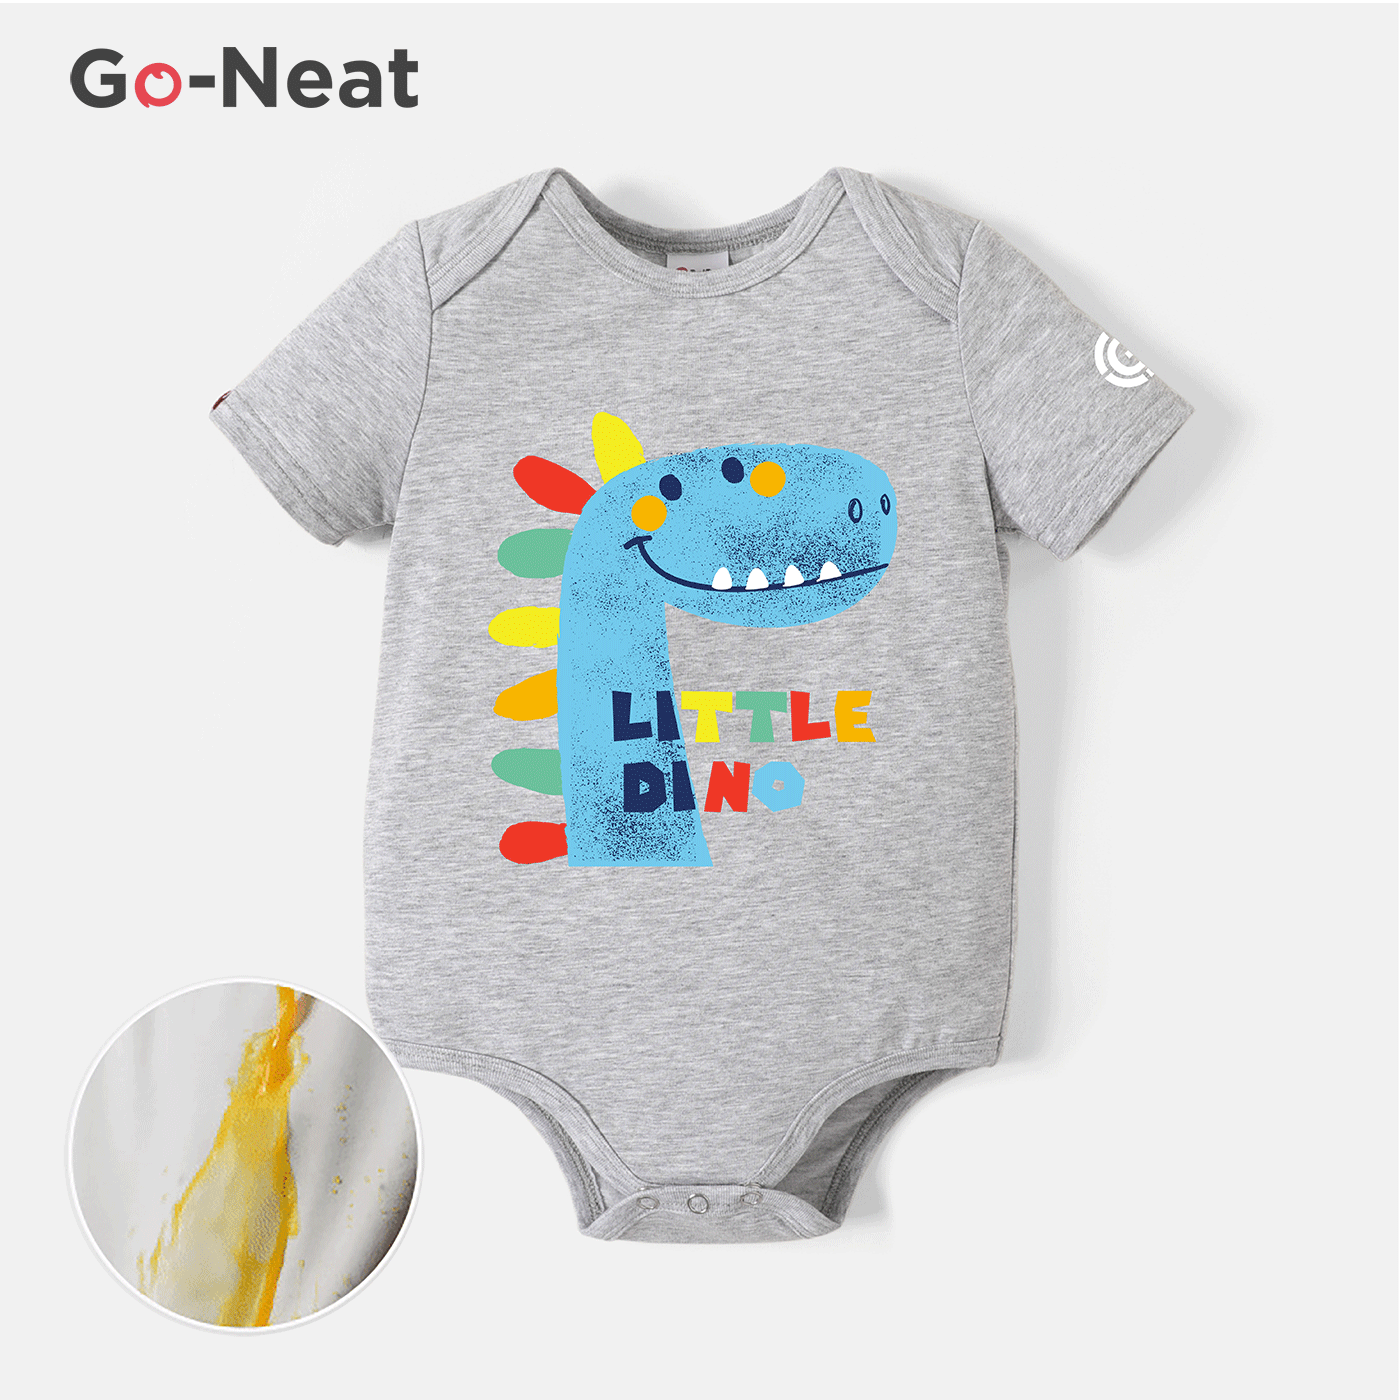 [0M-24M] Go-Neat Water Repellent and Stain Resistant Baby Boy/Girl Colorful Dinosaur & Letter Print Short-sleeve Romper Grey